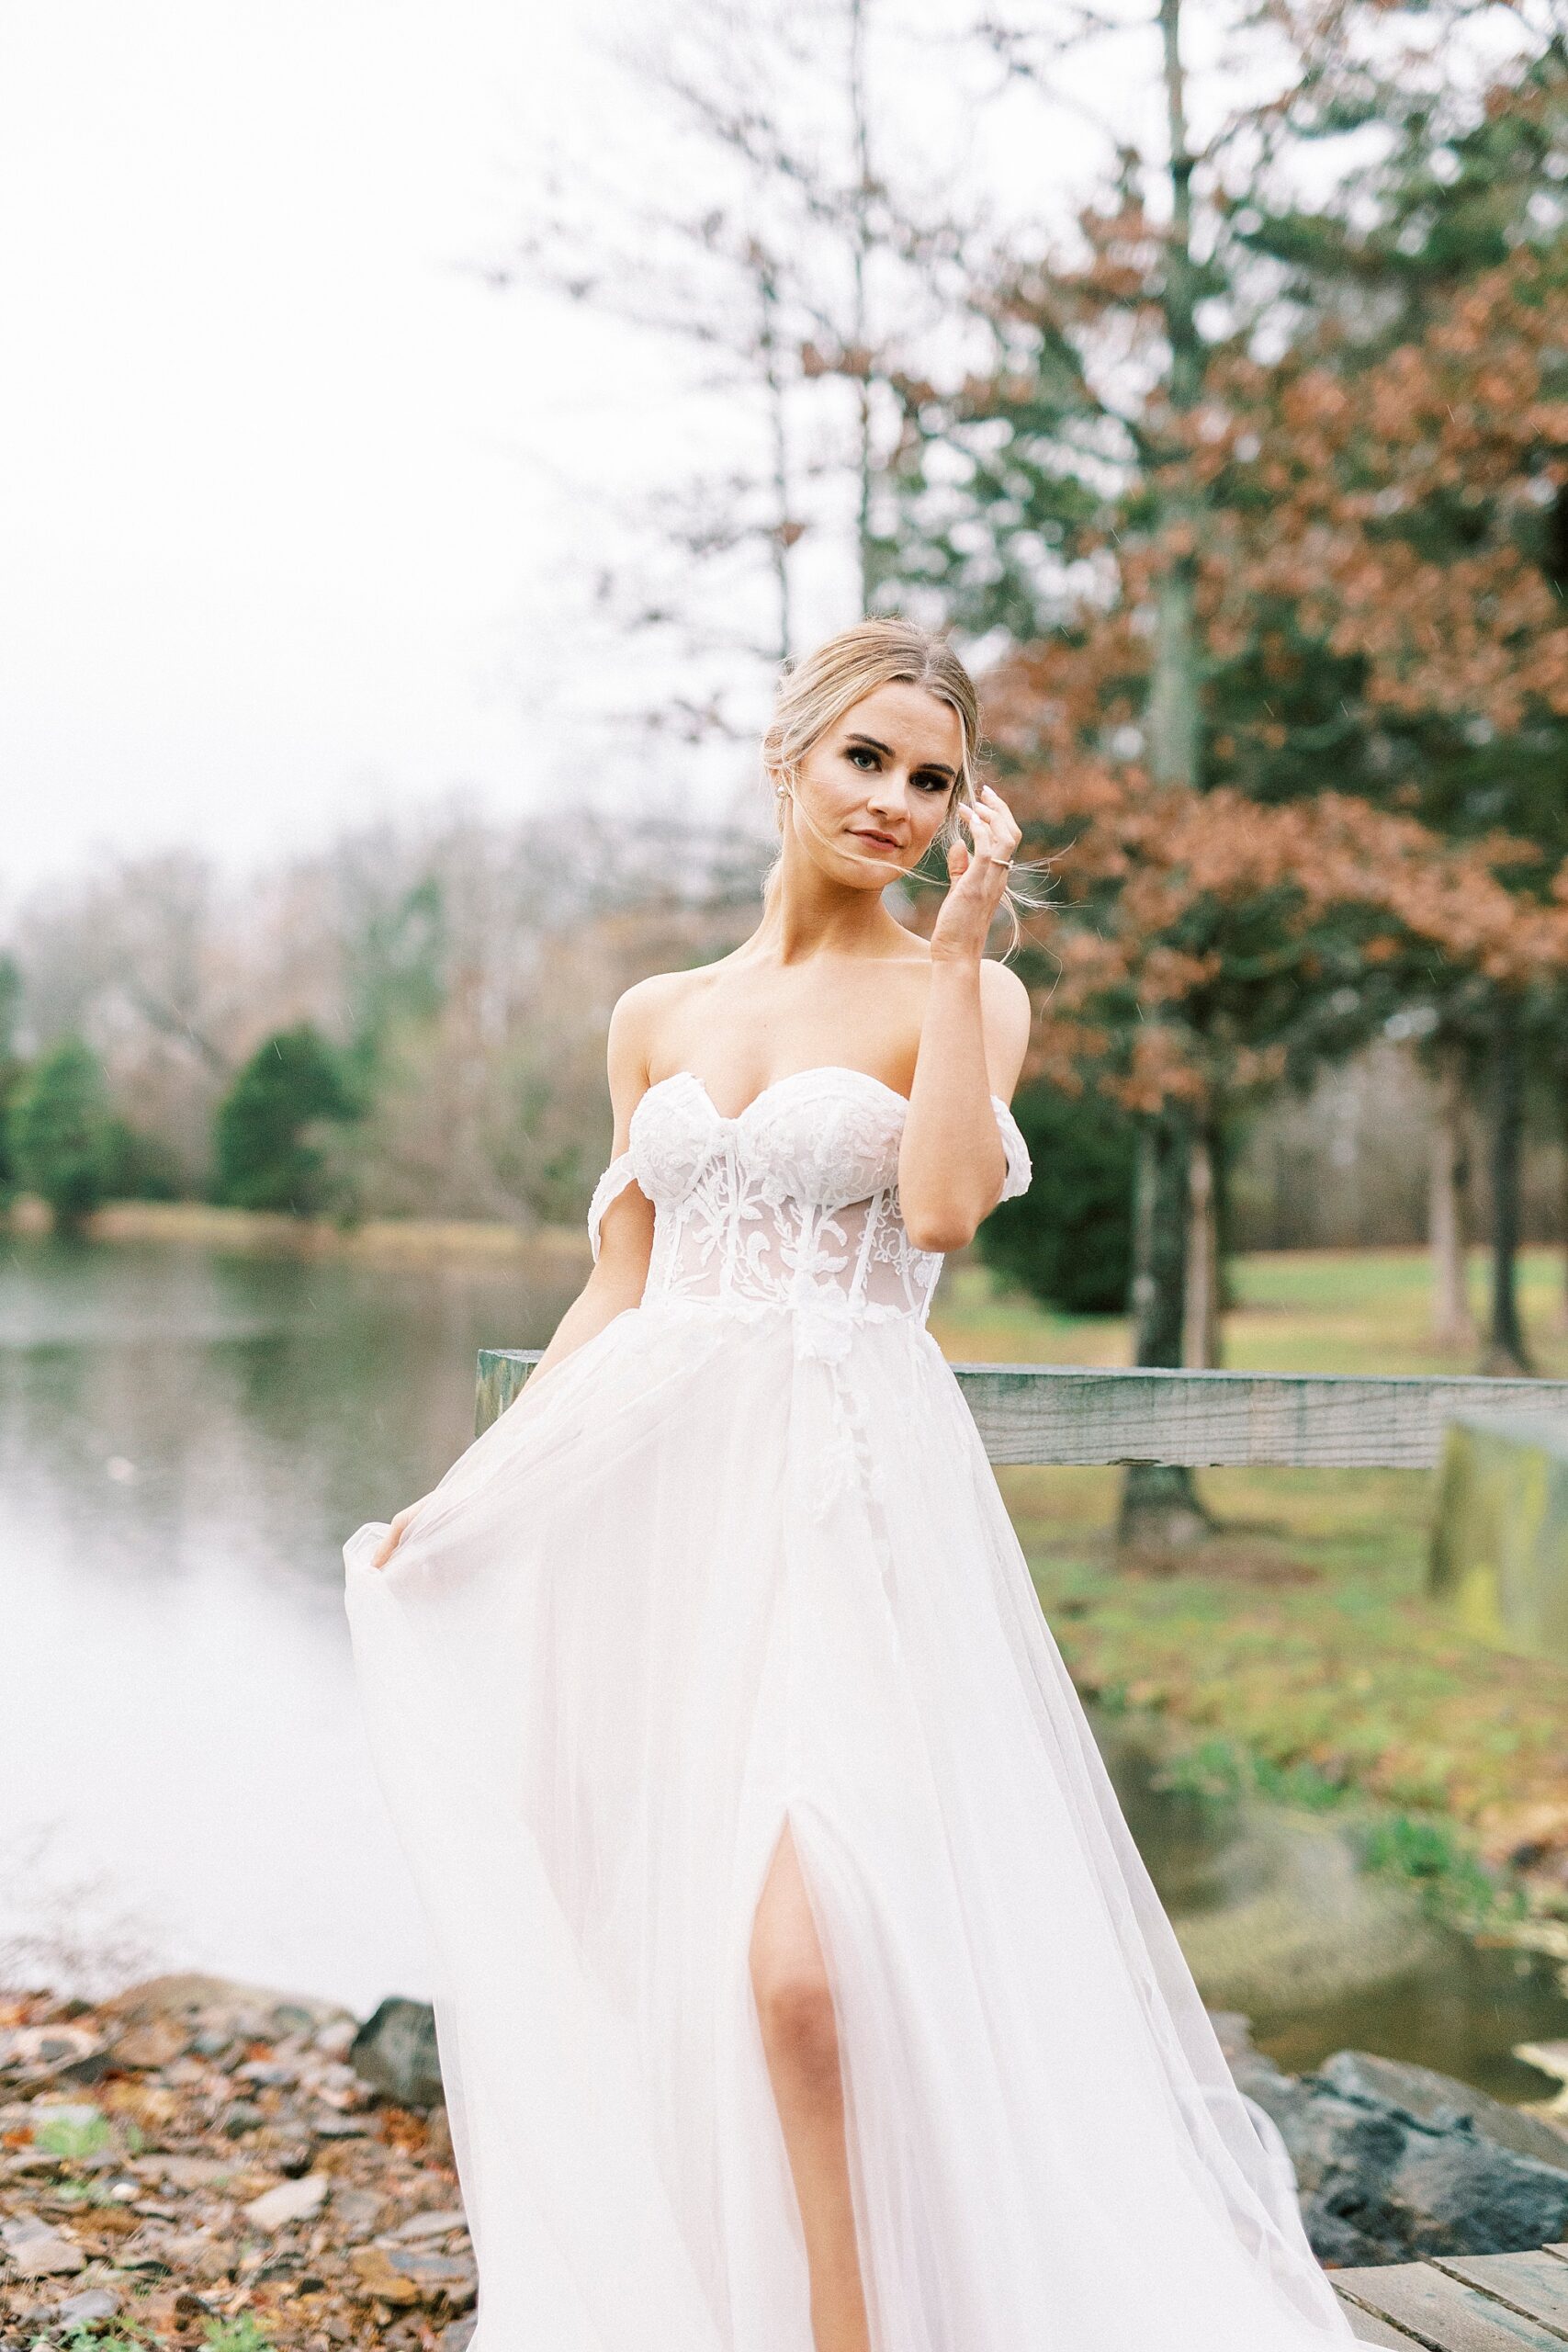 blonde woman in off-the-shoulder wedding gown pushes hair over ear 